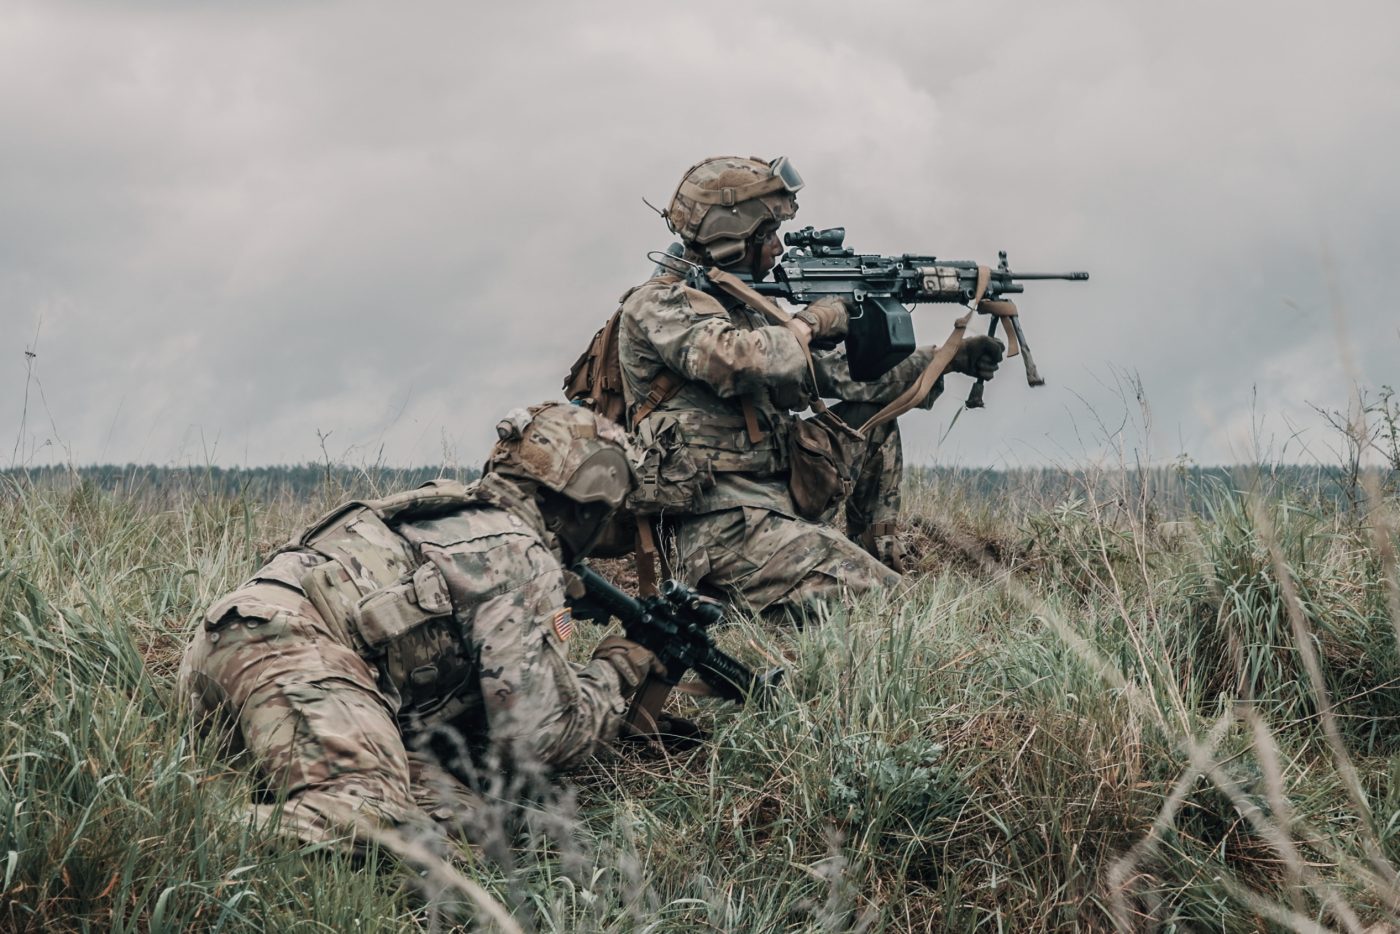 Photo: Soldiers with the US Army’s 2nd Cavalry Regiment participate in a live-fire drill during Exercise Griffin Shock in Bemowo Piskie, Poland. Credit: NATO